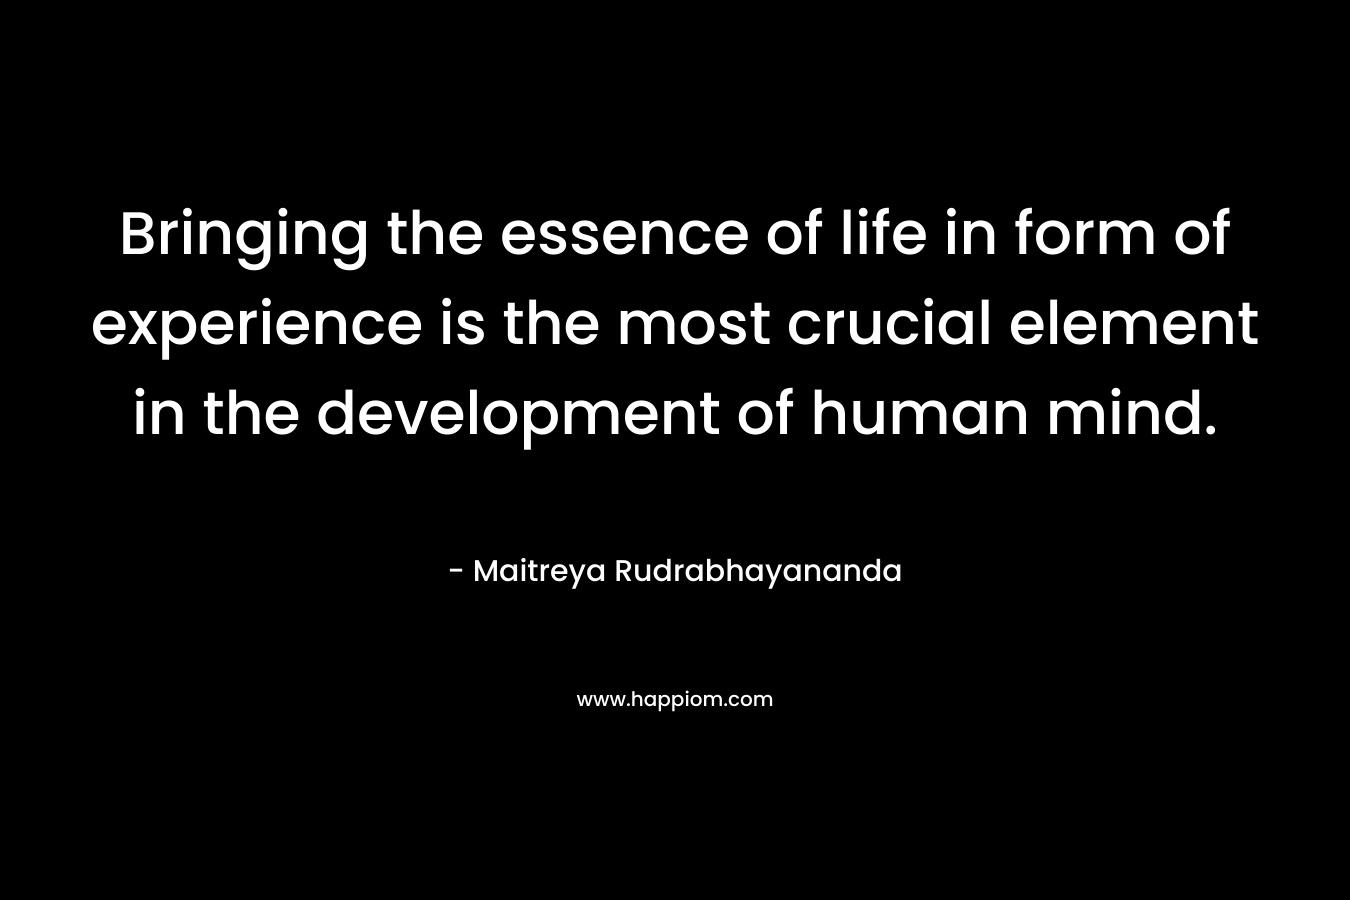 Bringing the essence of life in form of experience is the most crucial element in the development of human mind.